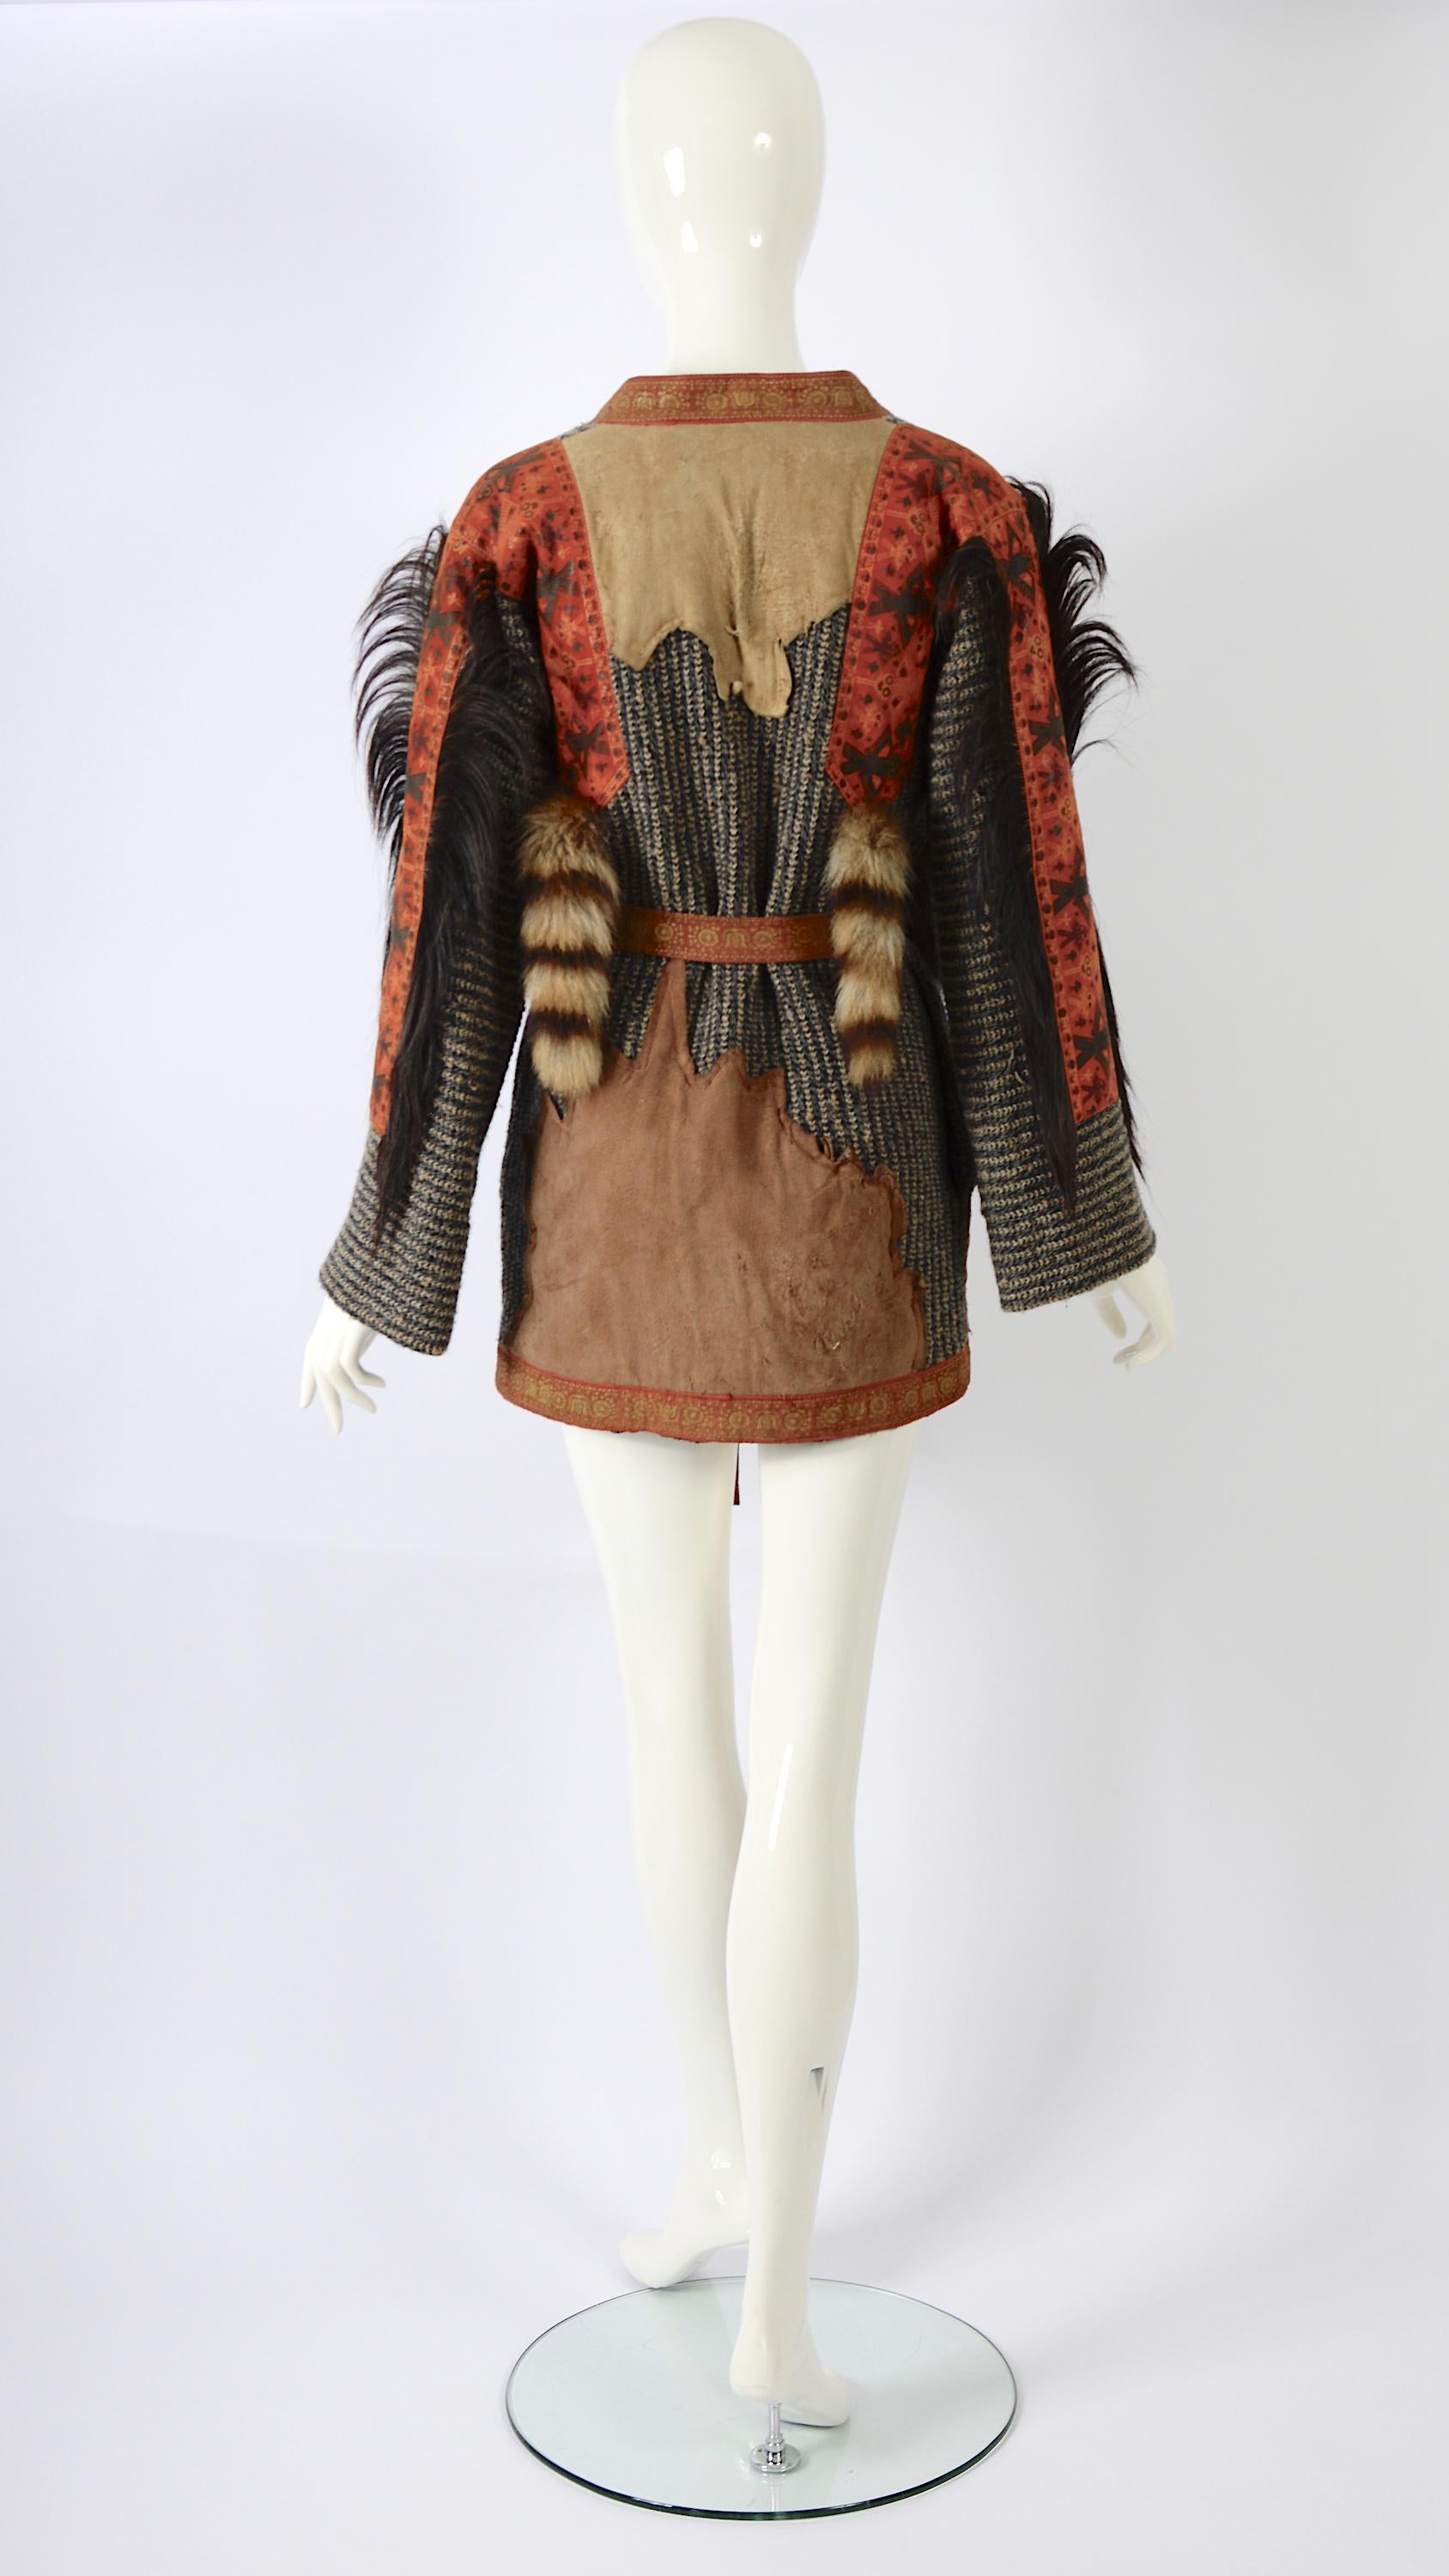 Roberto Cavalli Museum-Worthy 1971 Patchwork Debut Collection Vintage Jacket  For Sale 2